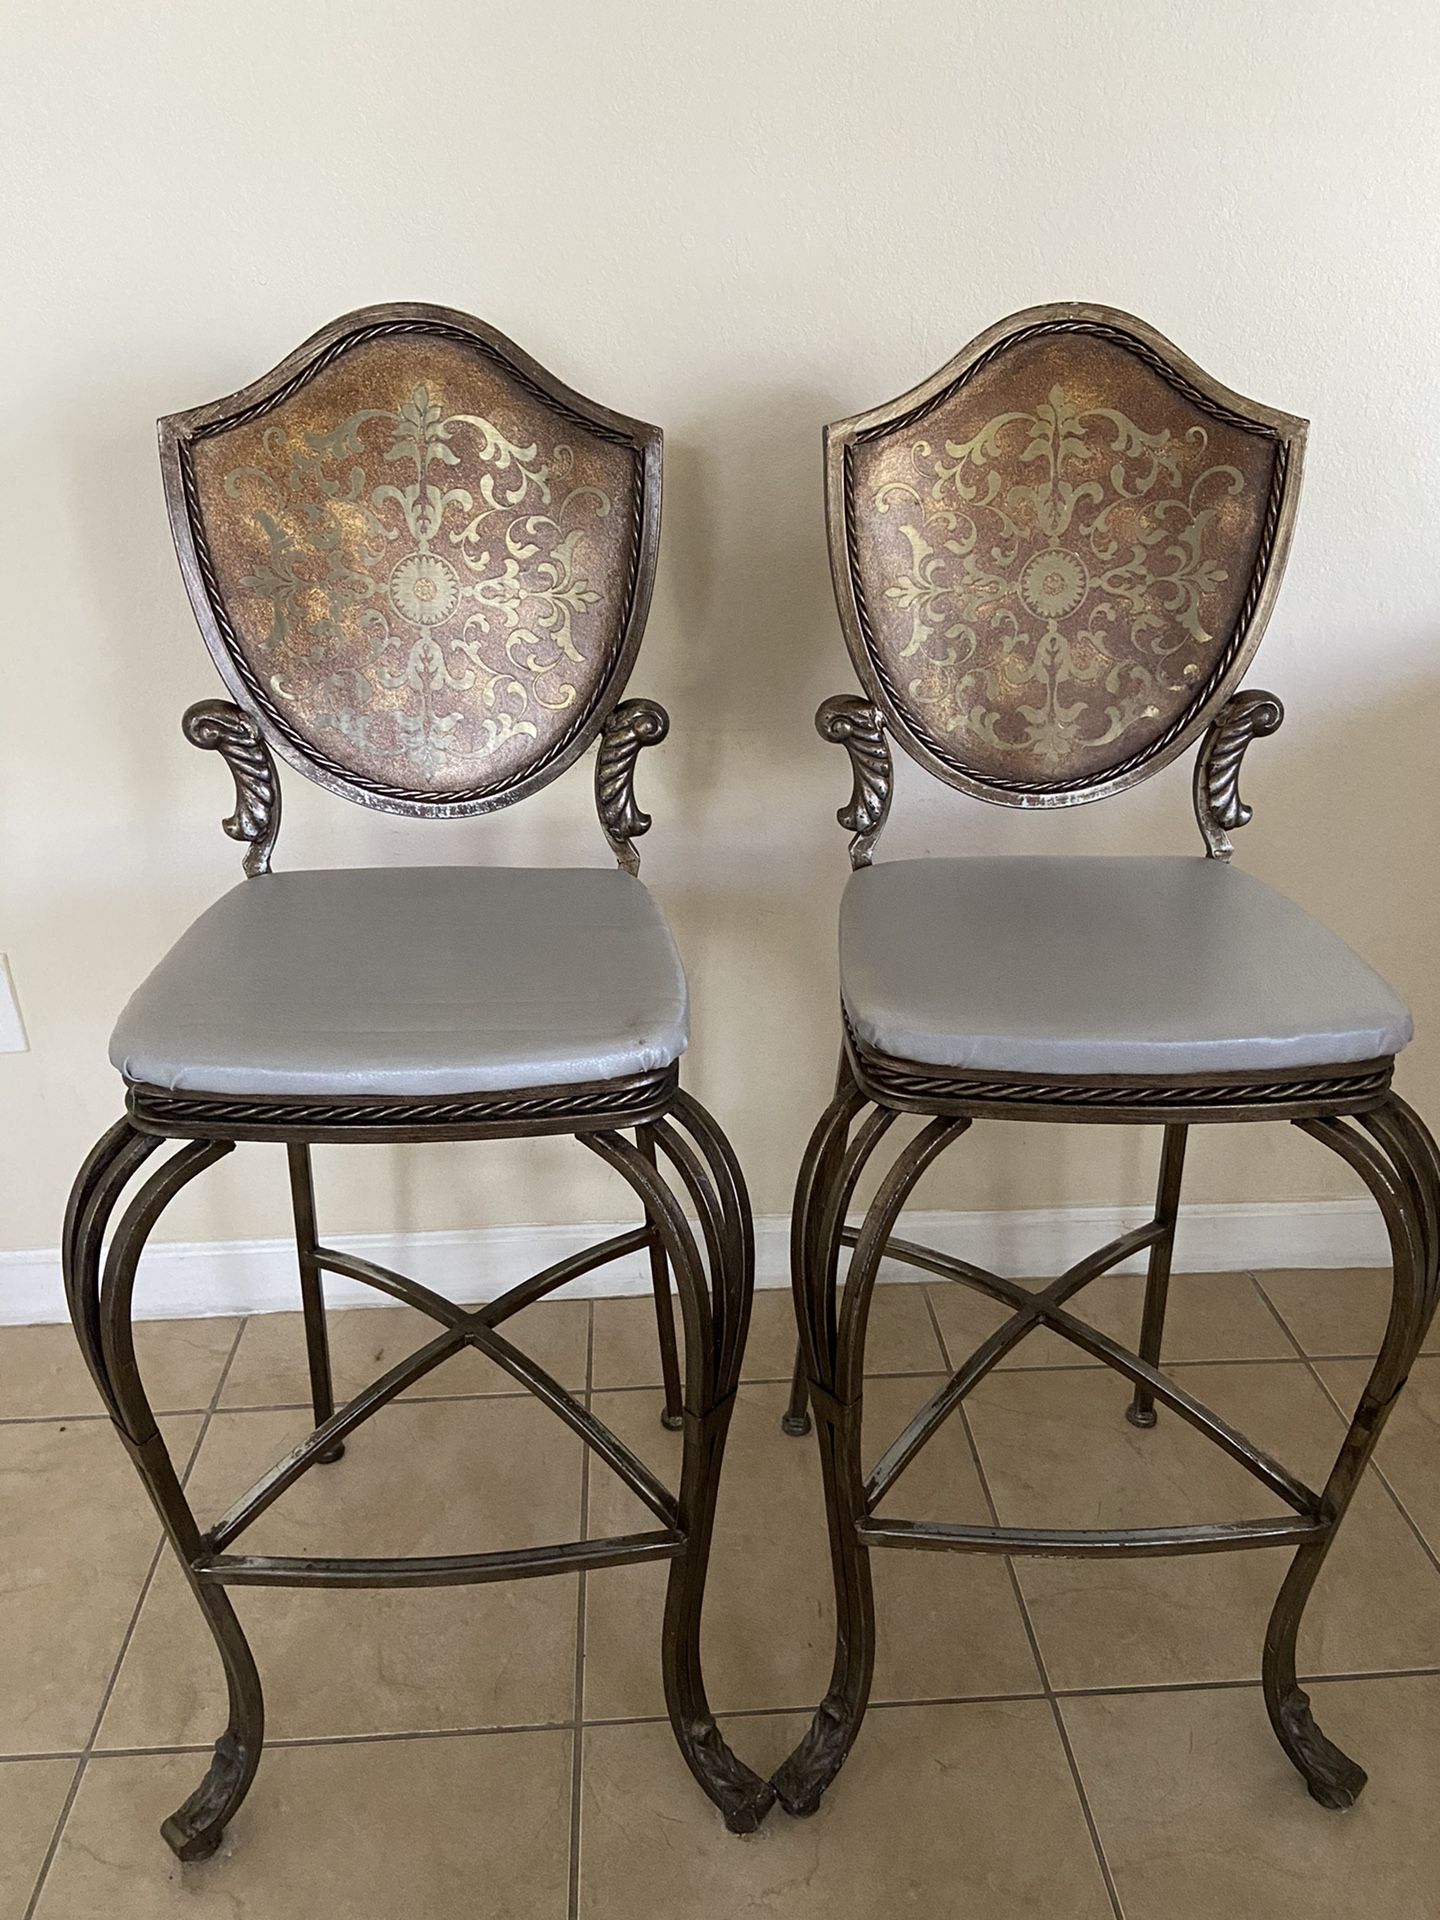 Antique Rustic Metal Chairs Set of 2